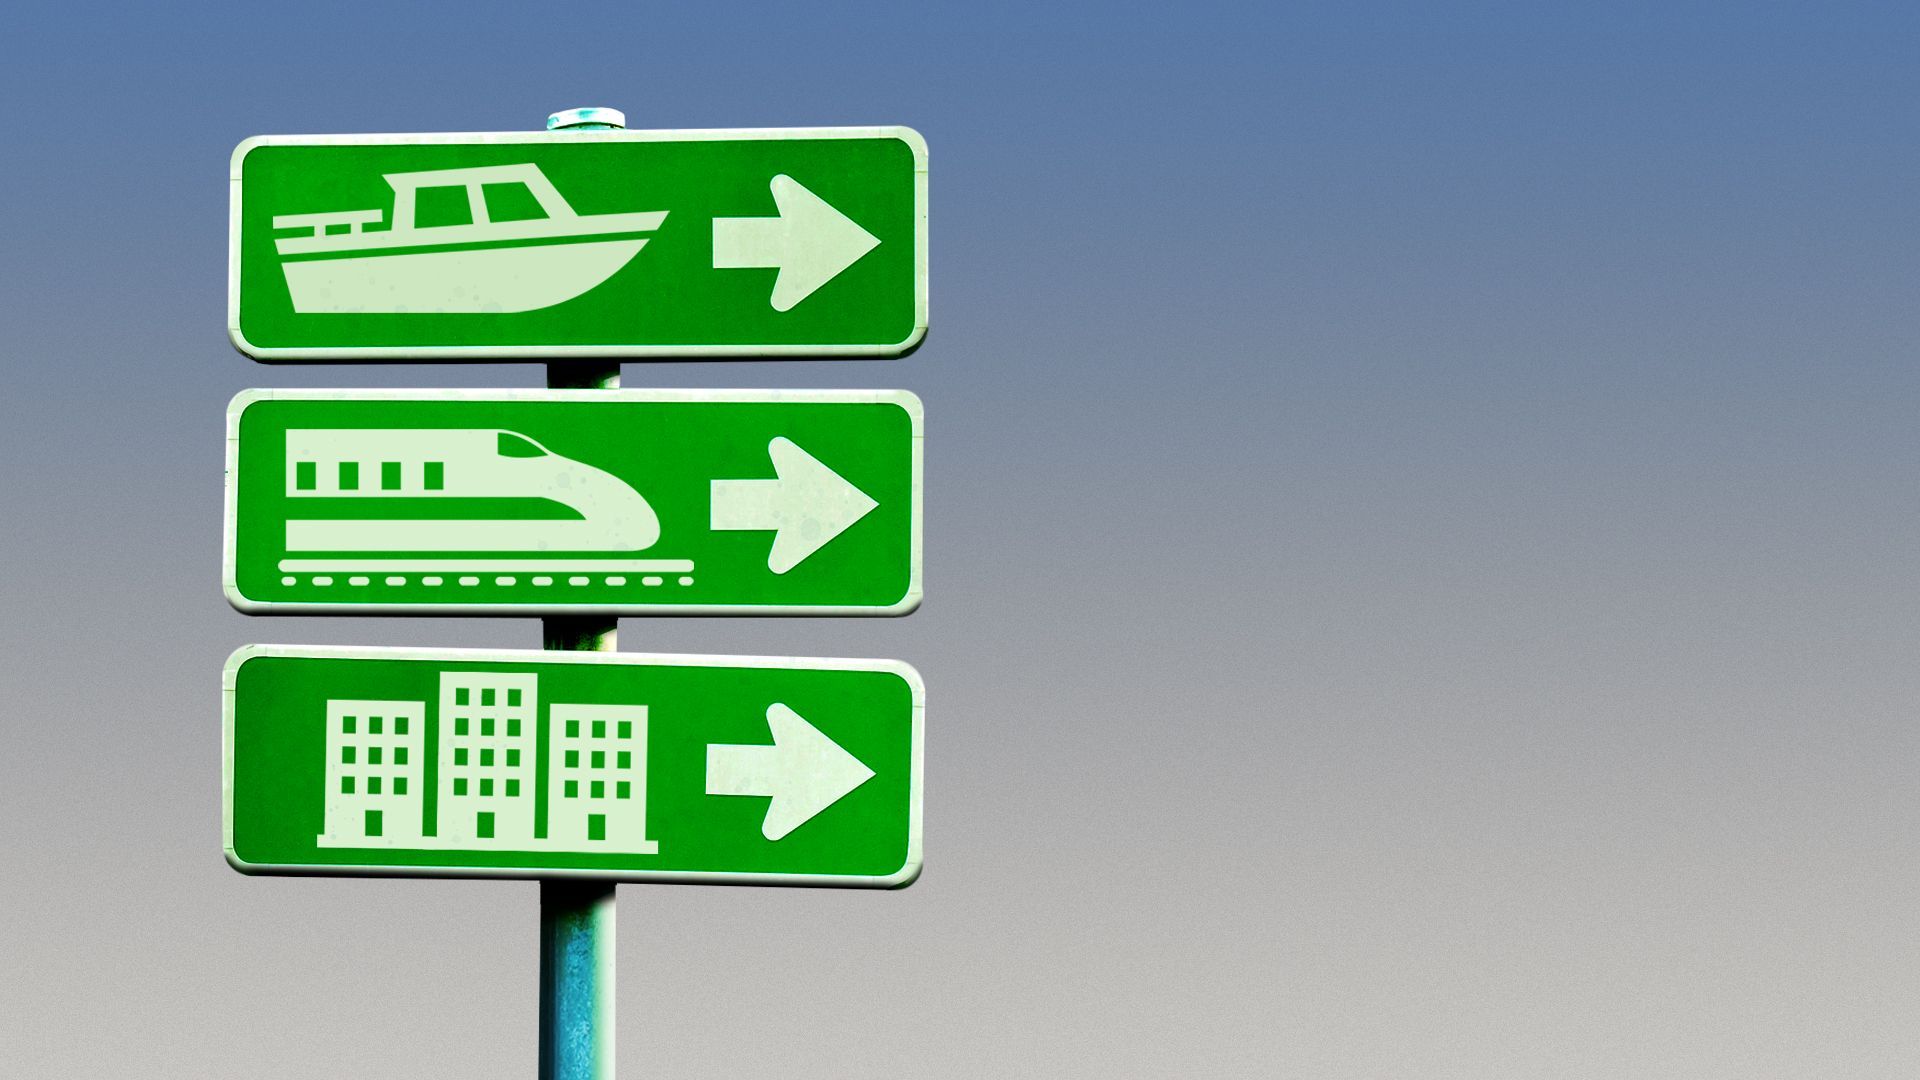 Illustration of a series of roadsigns on a pole with boat, train, and building icons